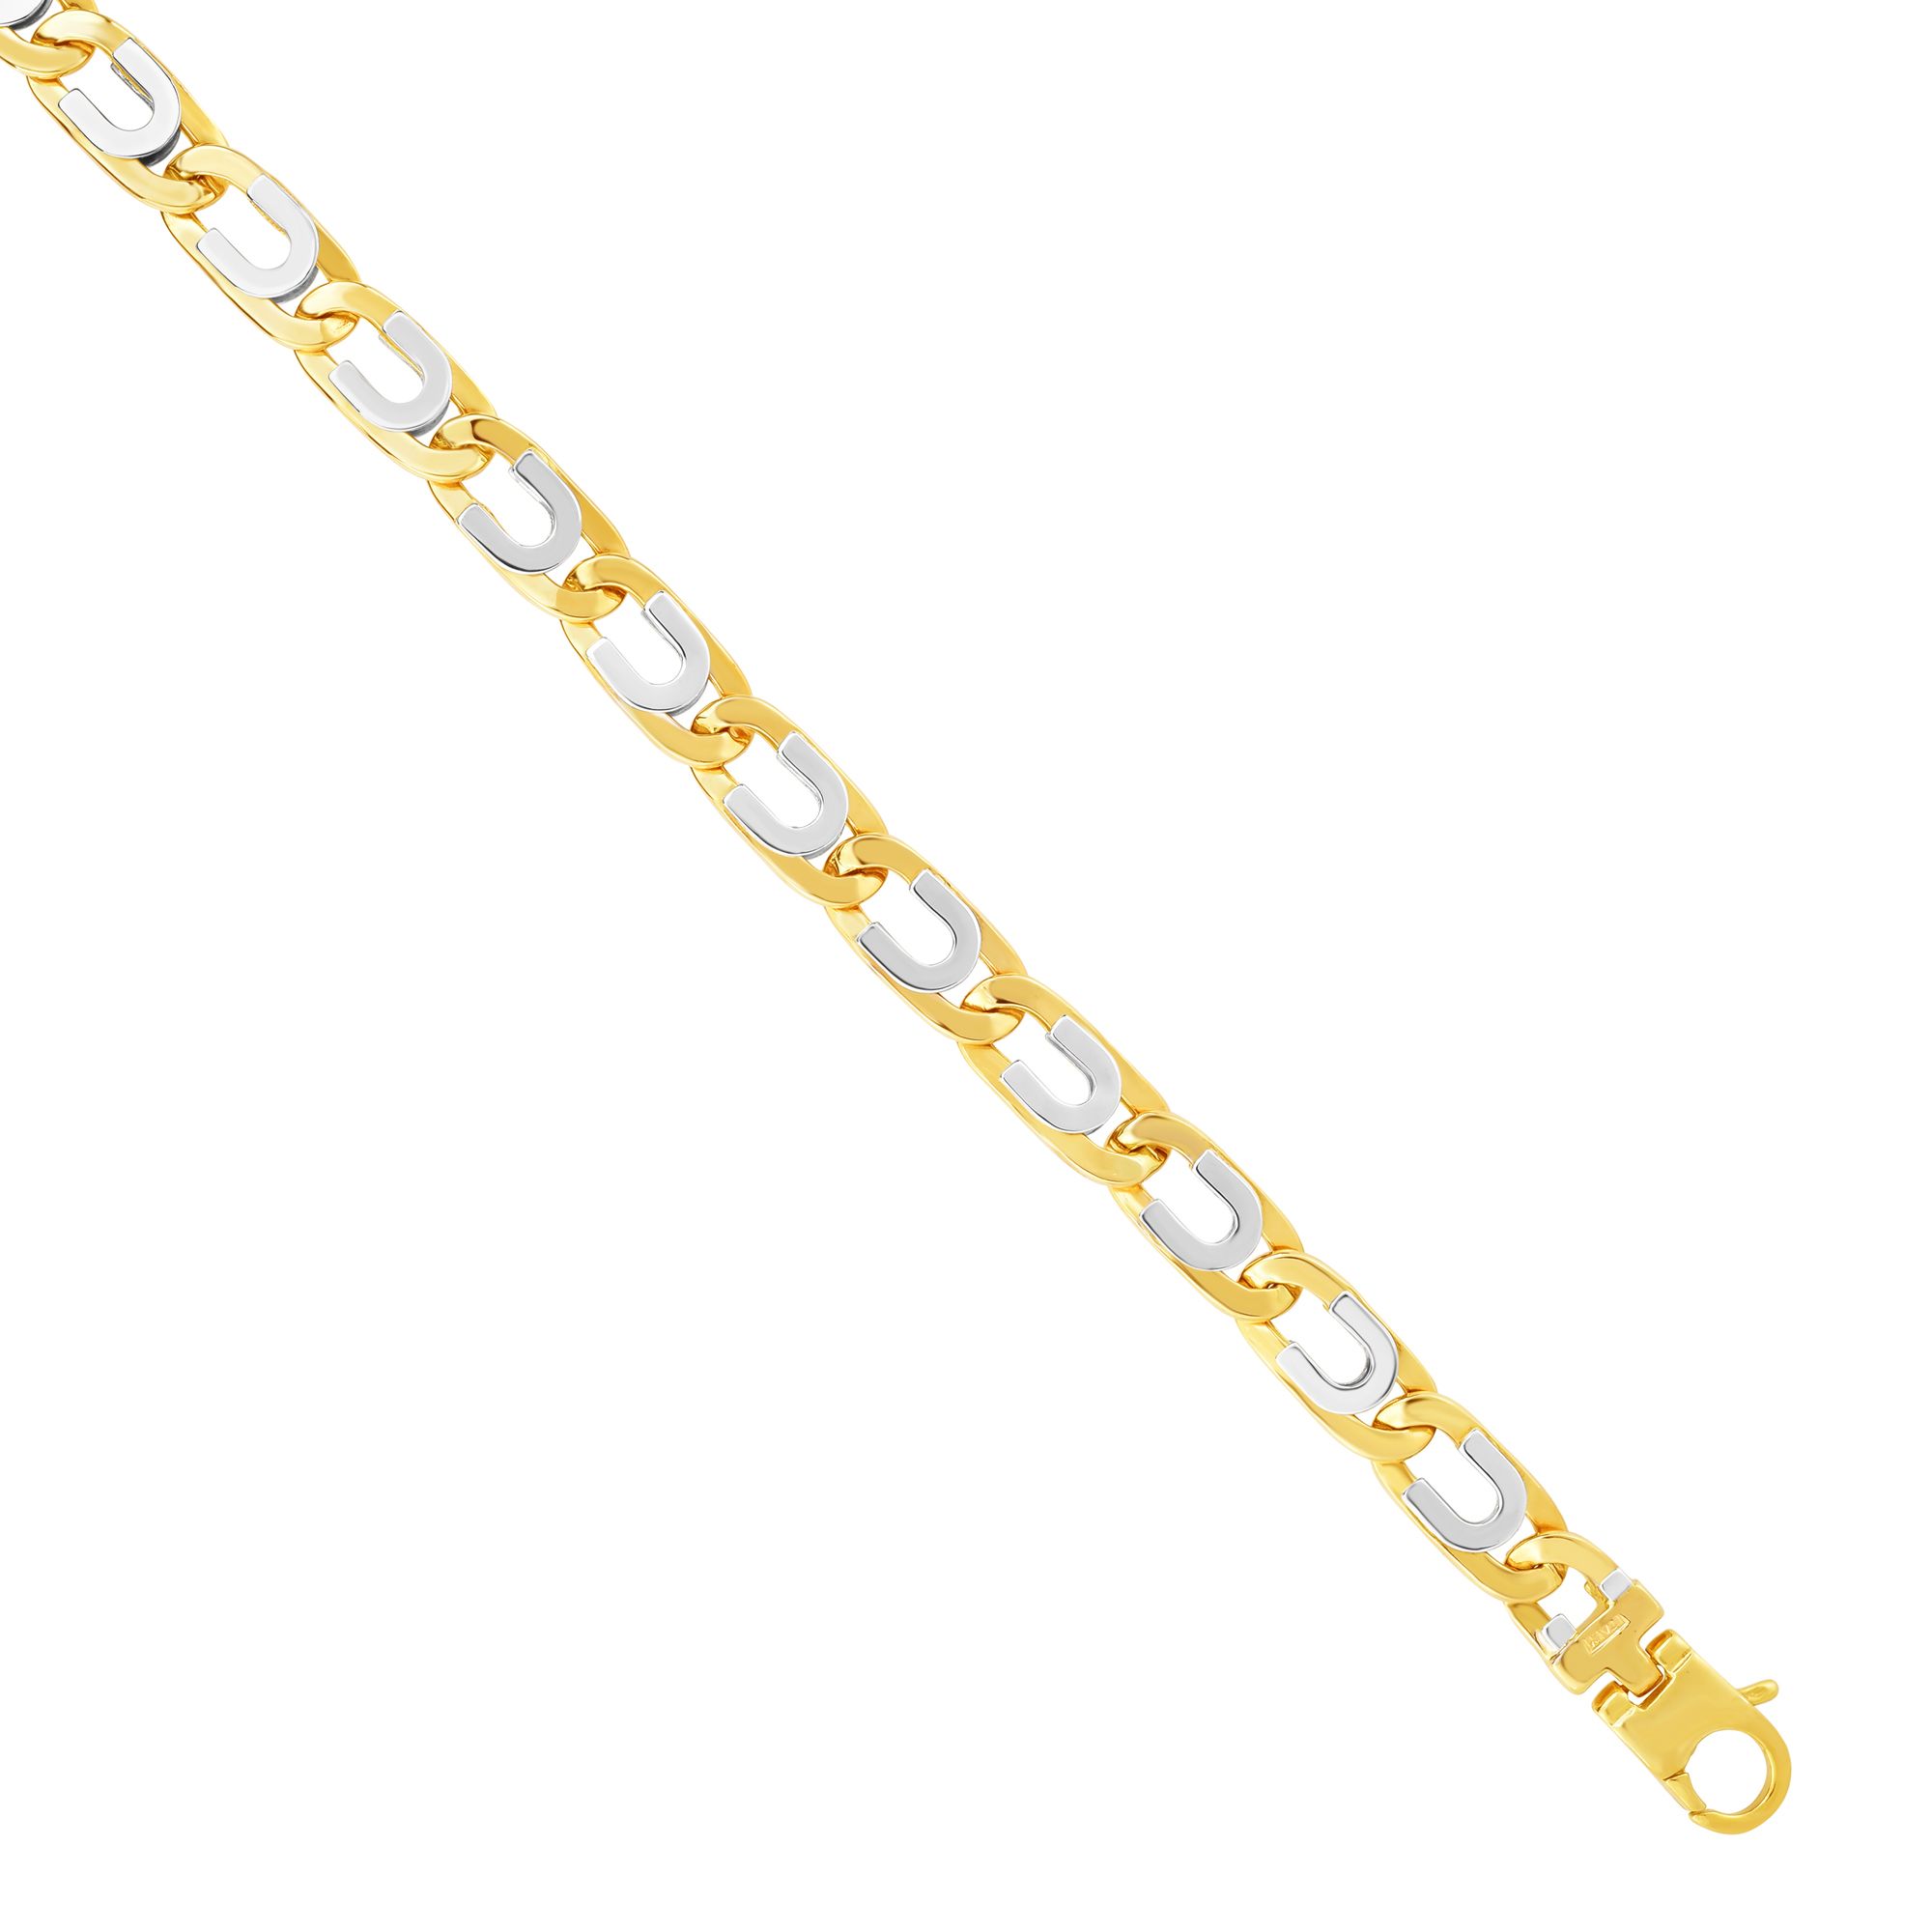 14kt Gold 8.5 inches Yellow+White Finish 7mm Shiny Oval Bracelet with Lobster Clasp